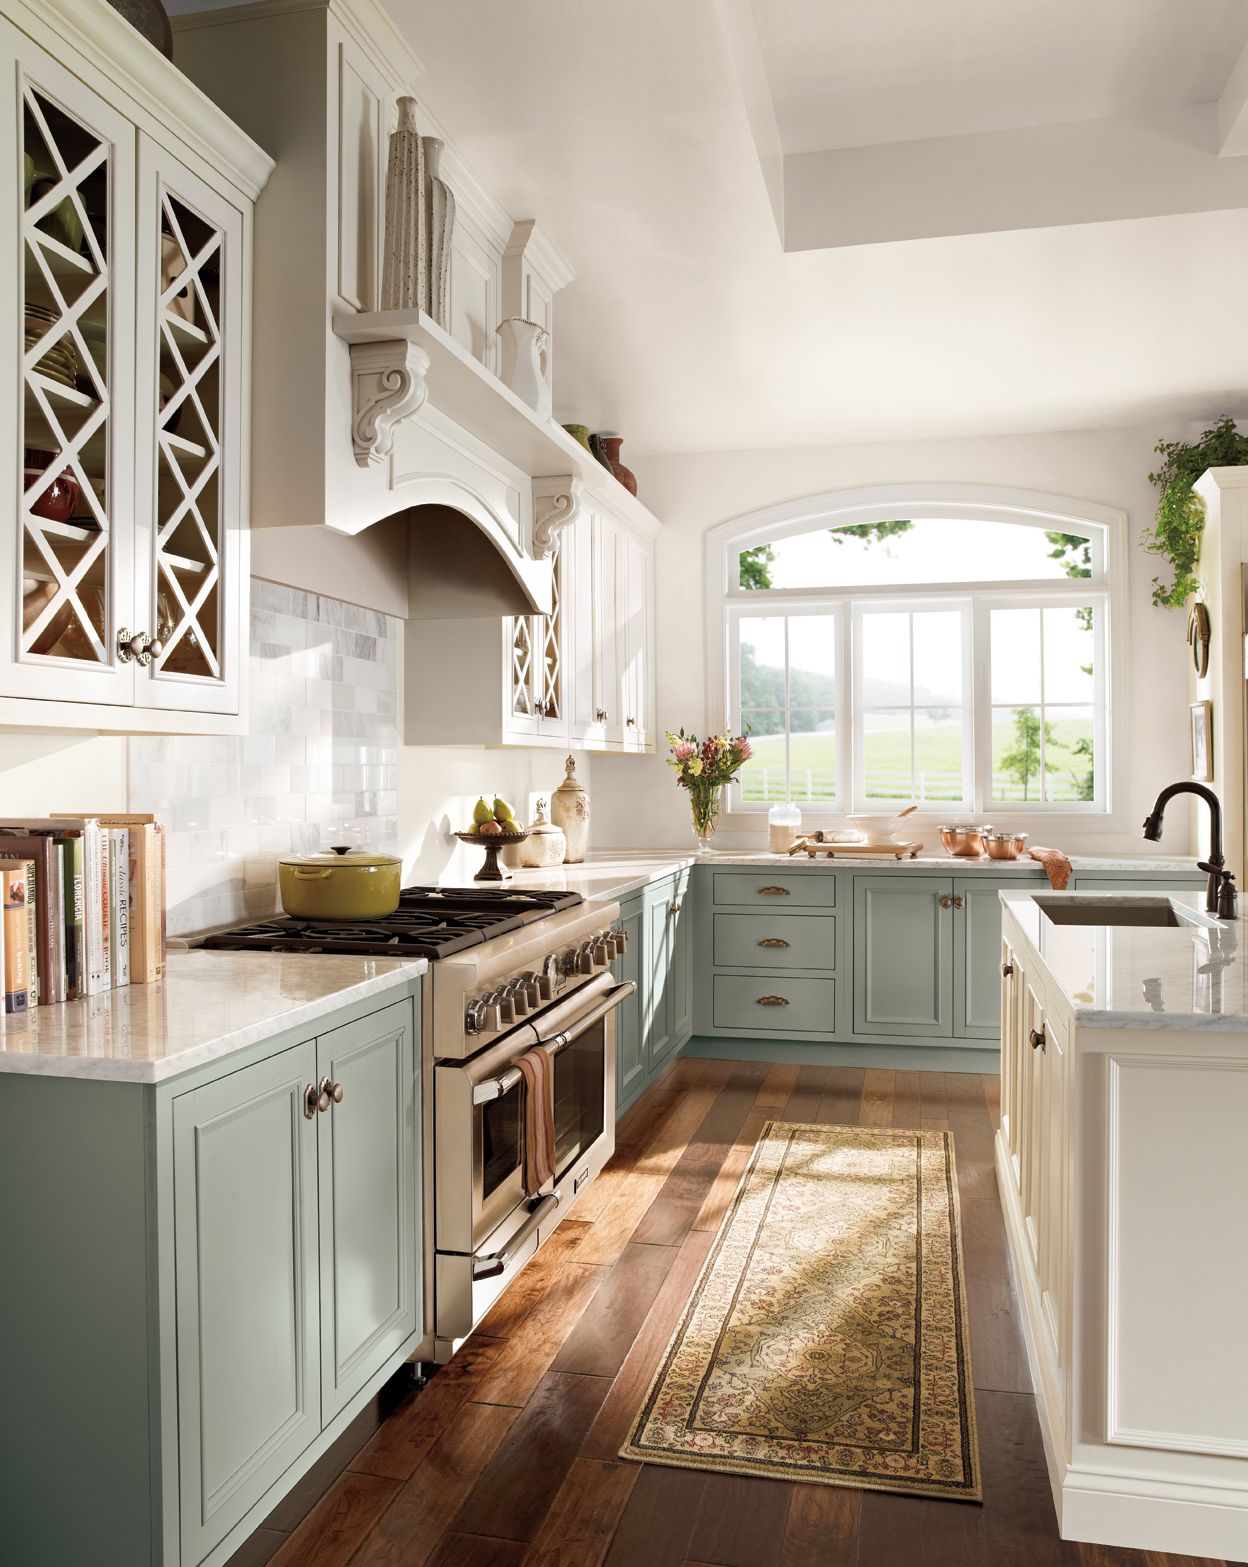 THESE Kitchen Cabinet Colors Are GORGEOUS!